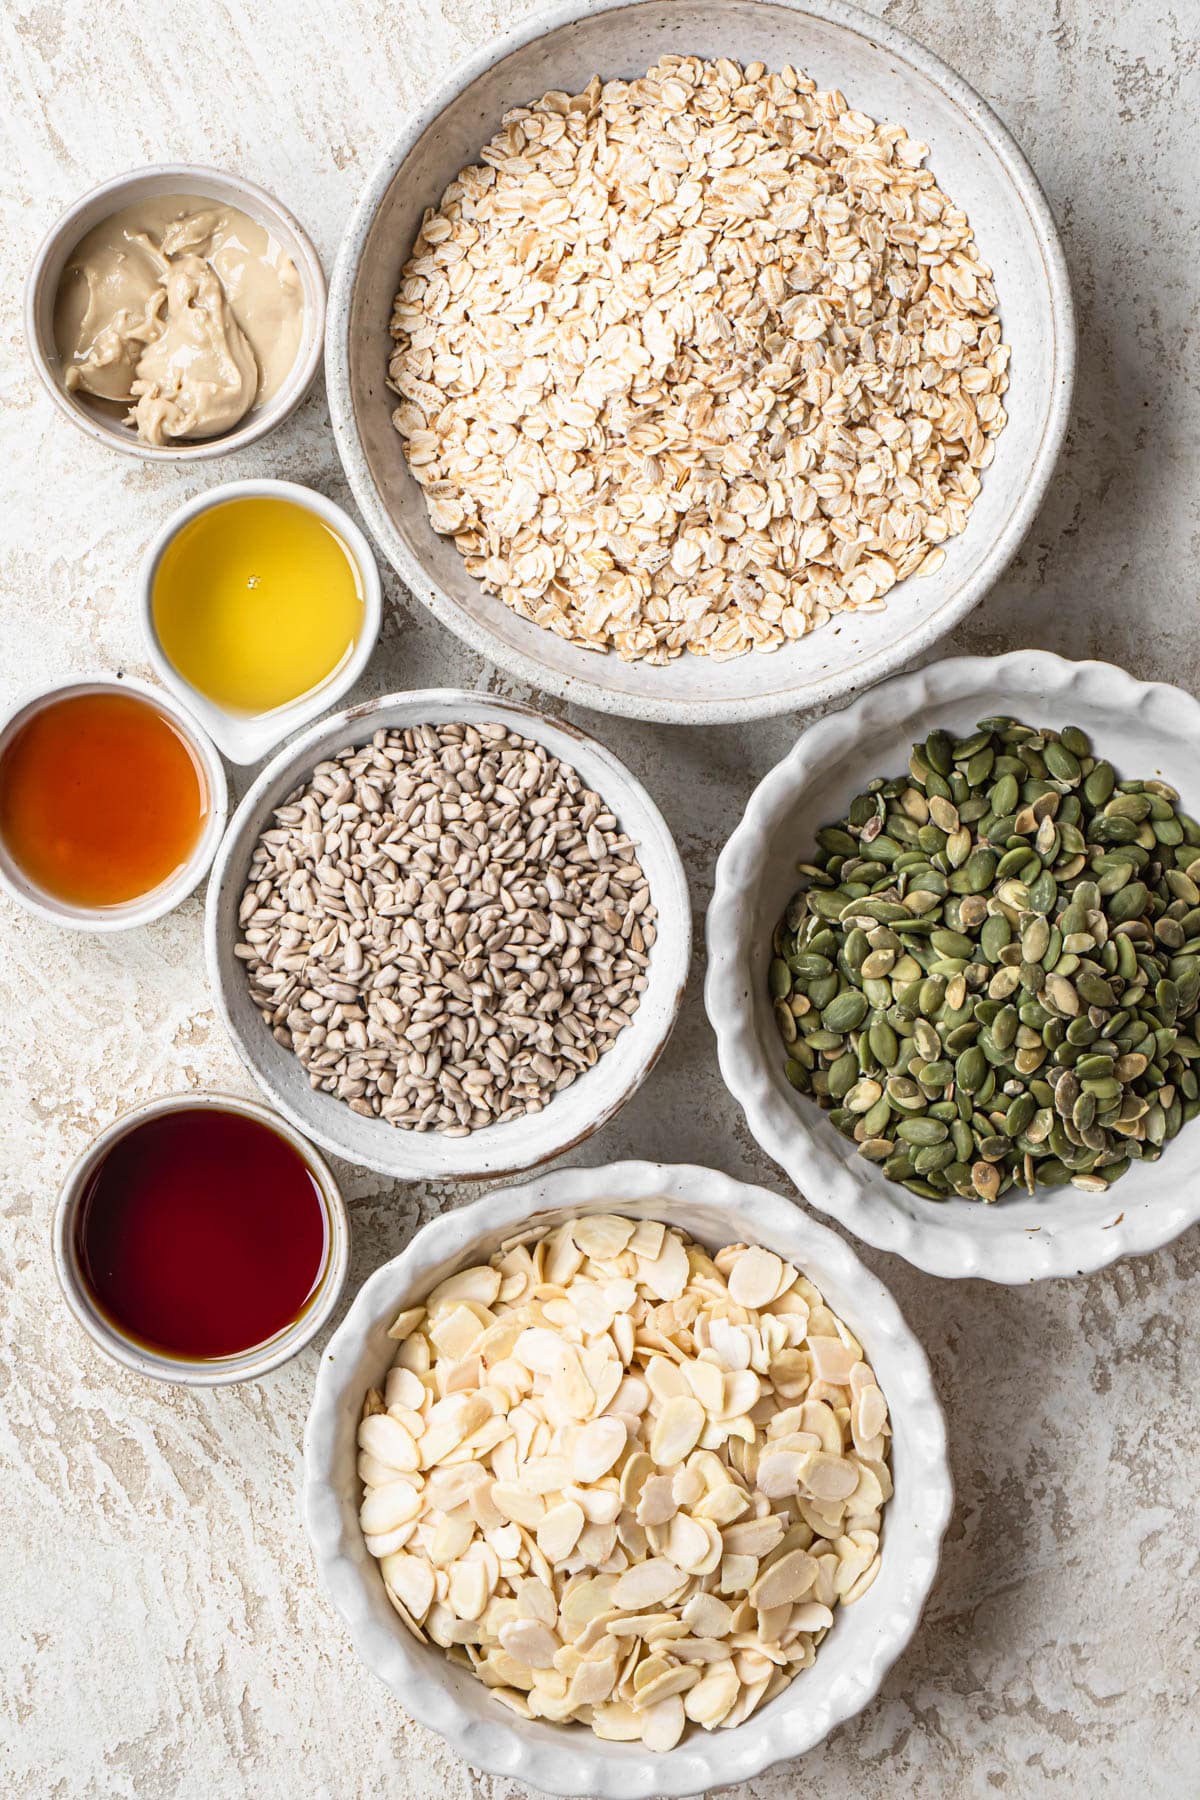 Ingredients for vanilla almond granola, laid out in individual bowls.